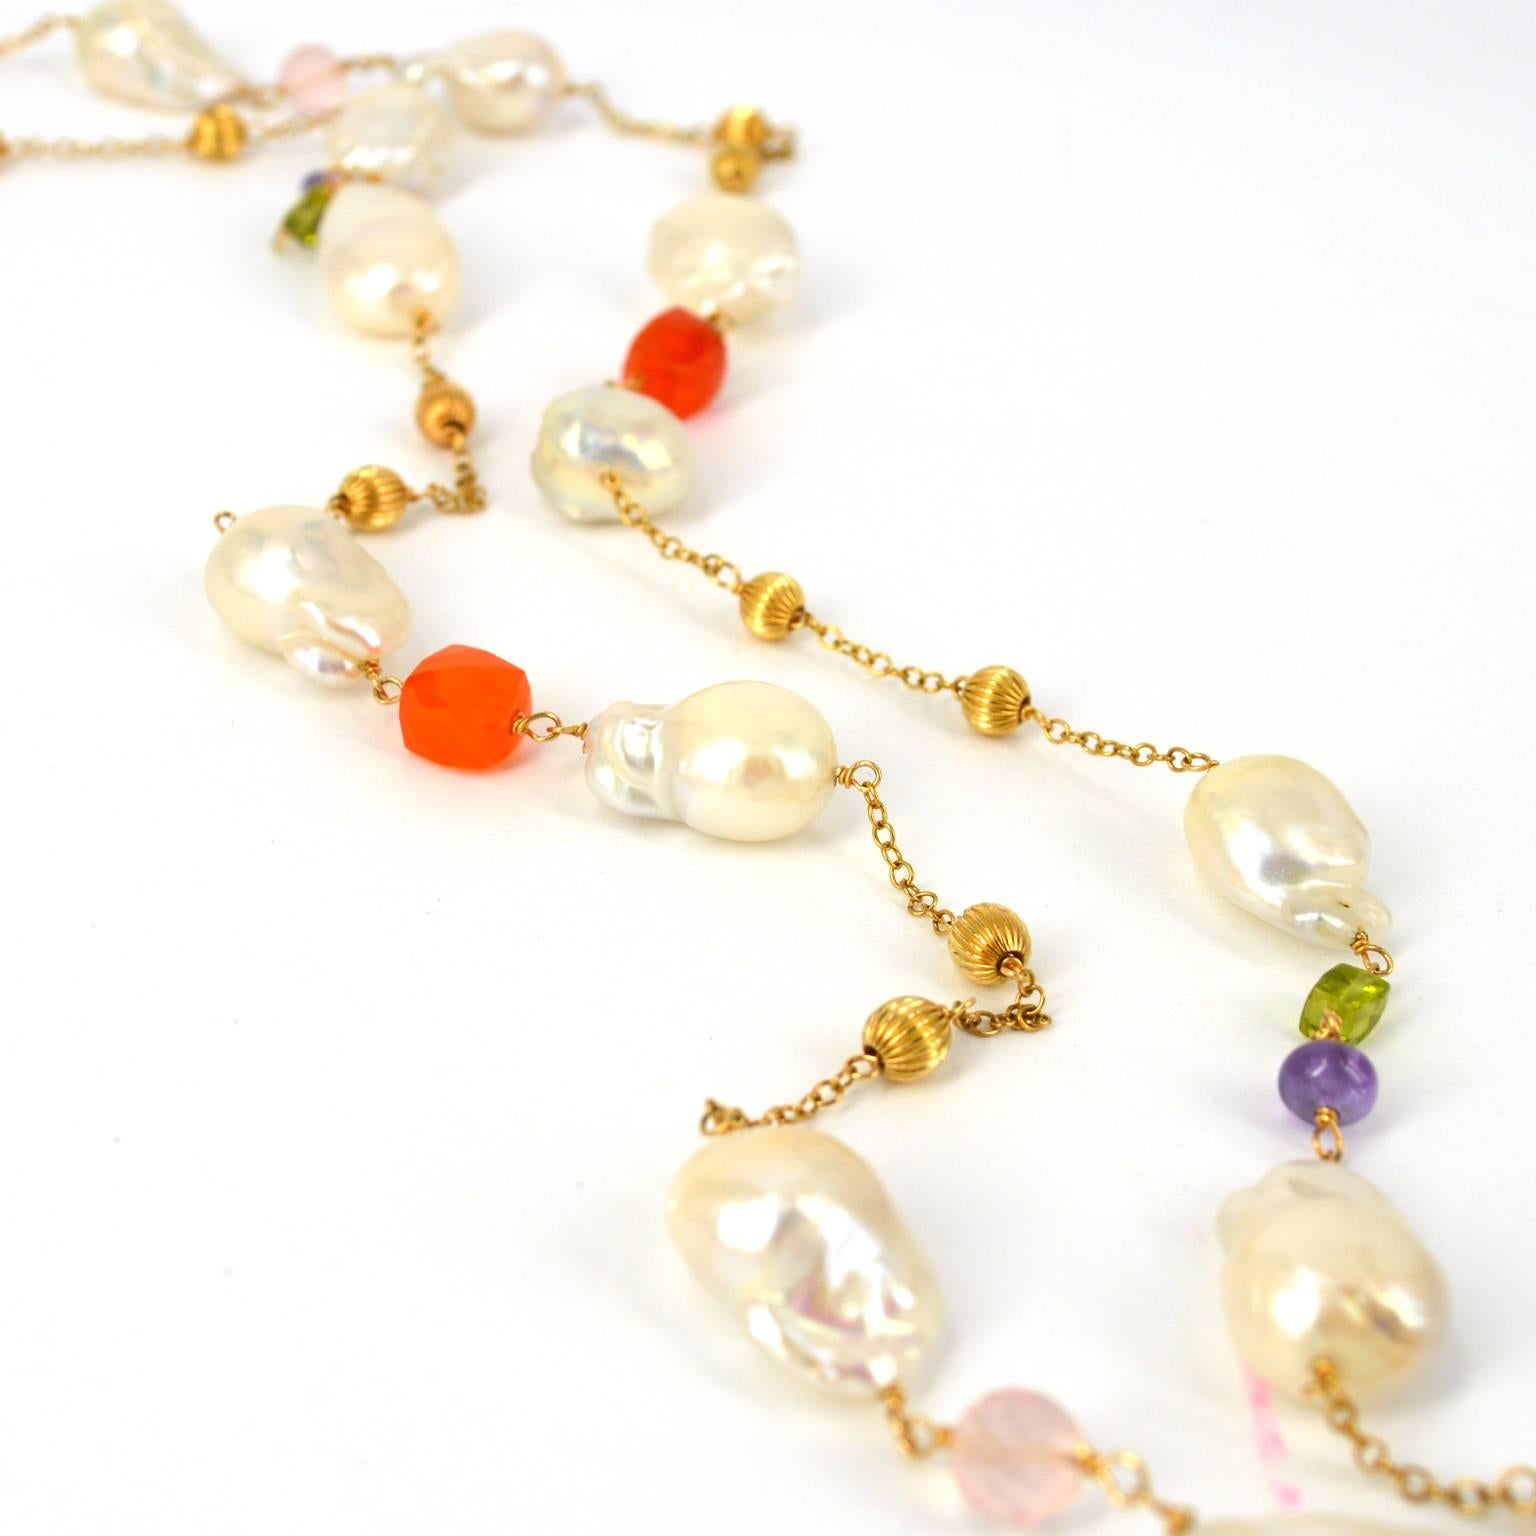 Stunning 14k Gold filled long necklace with Freshwater Keshi Pearls and gemstones. Carnelian 6mm faceted cubes Amethyst Peridot 4mm faceted cubes Rose Quartz and Blue Topaz 6mm faceted round beads. Freshwater pearls size is approximately 16mm. Each